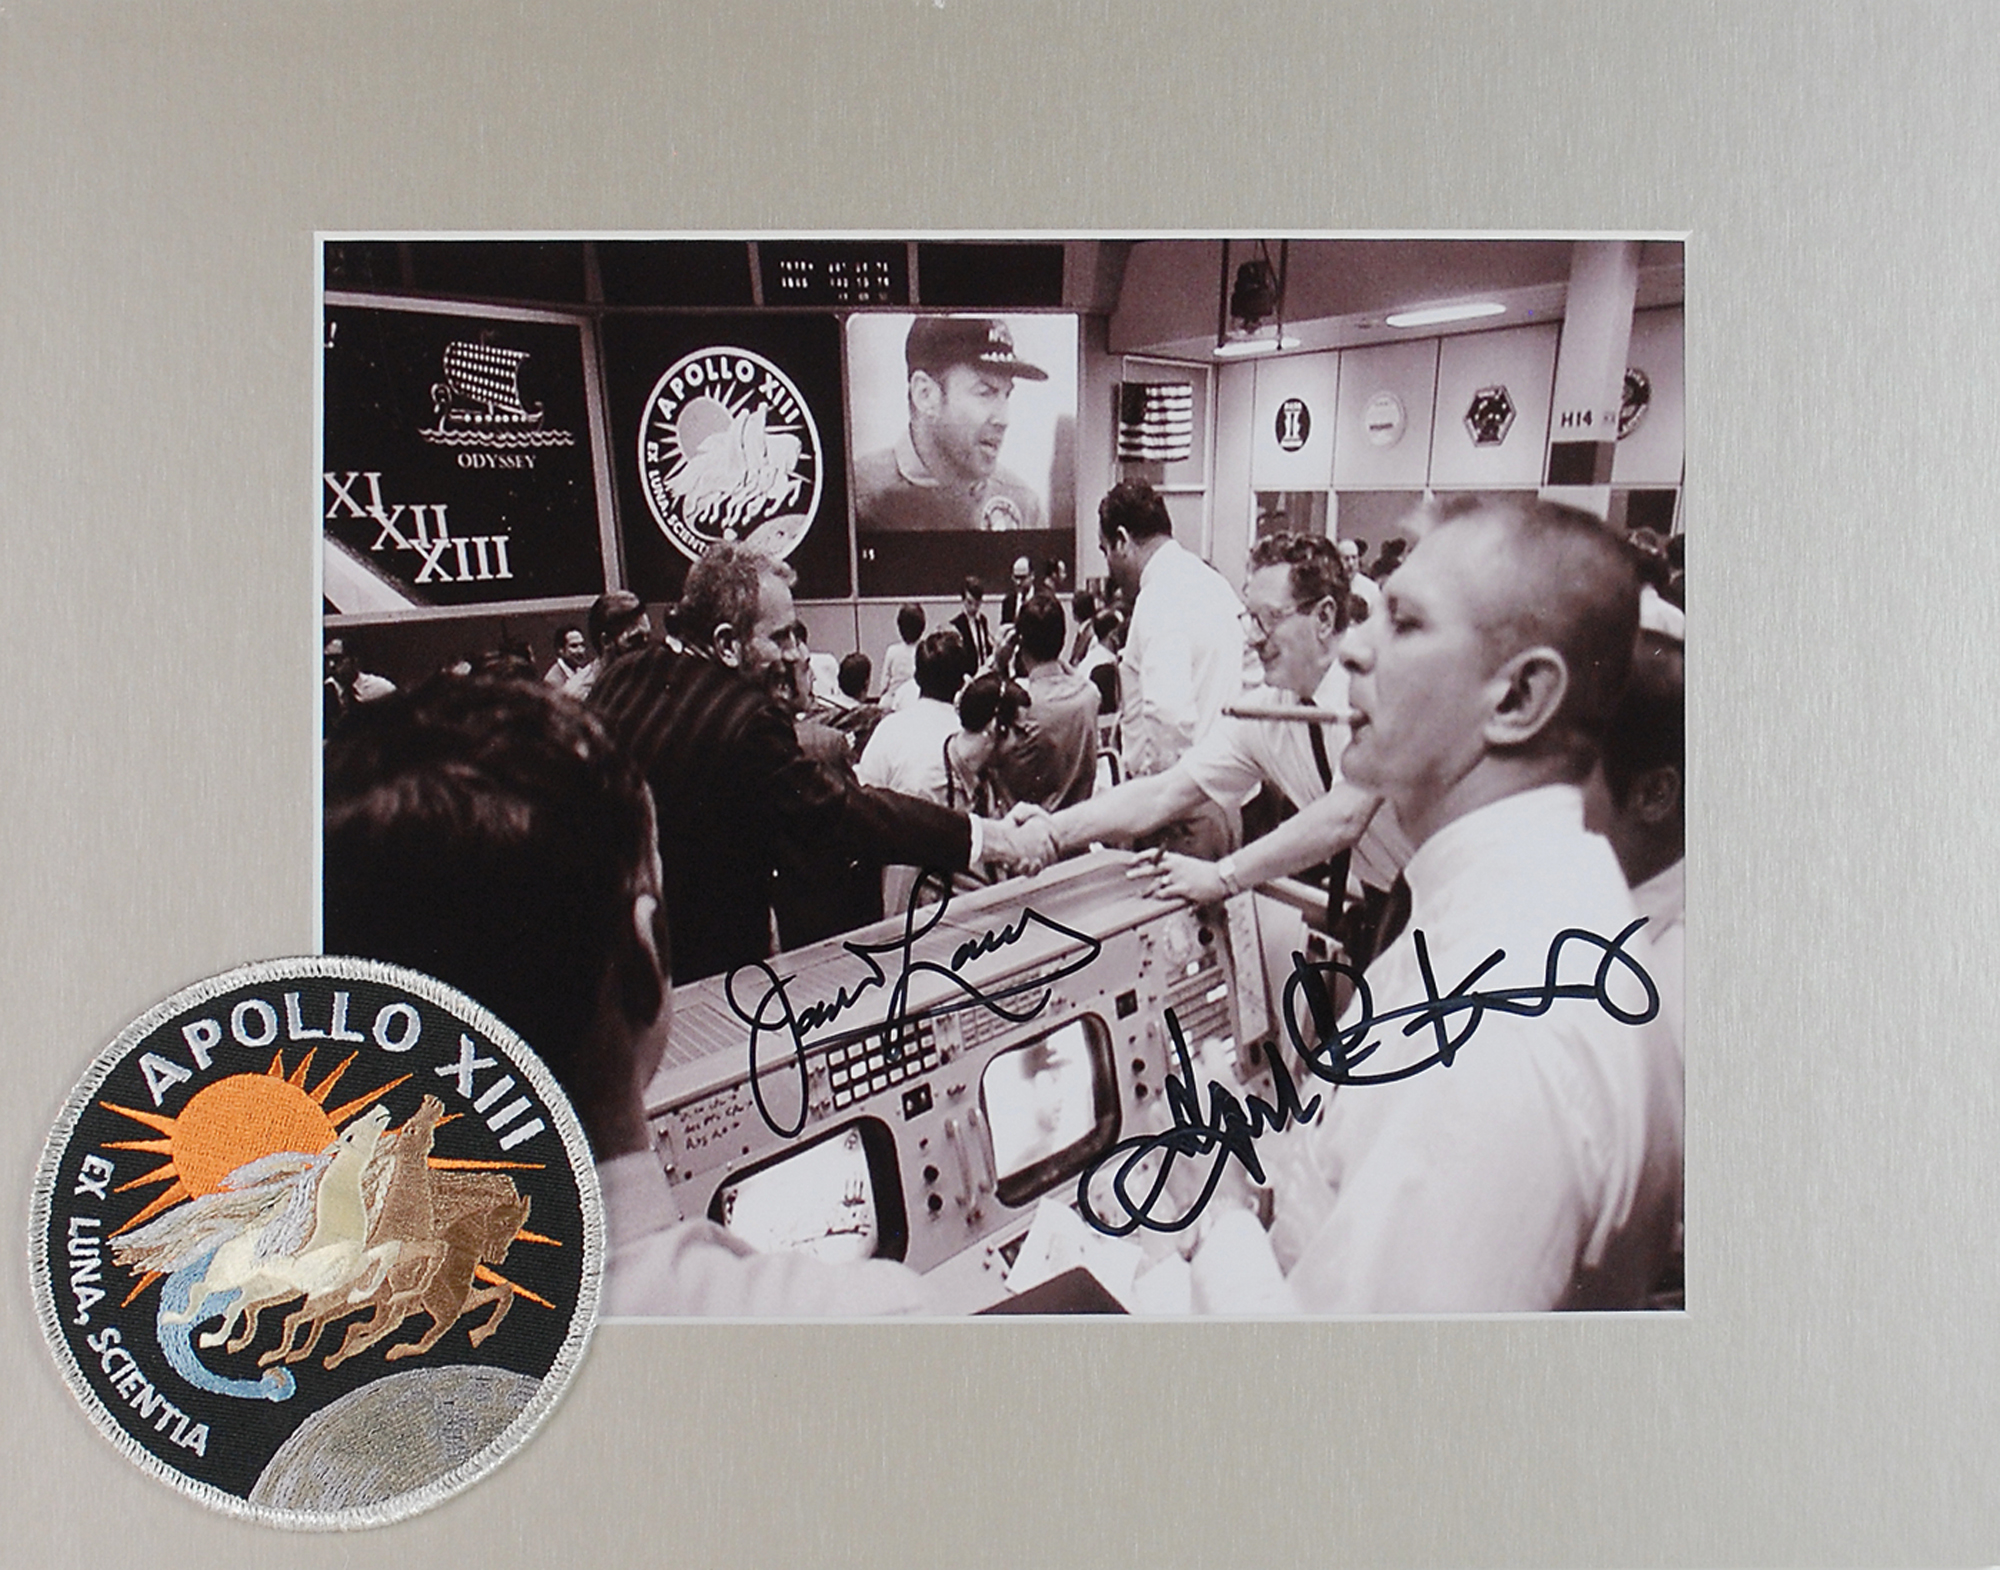 James Lovell and Gene Kranz Signed Photograph | RR Auction